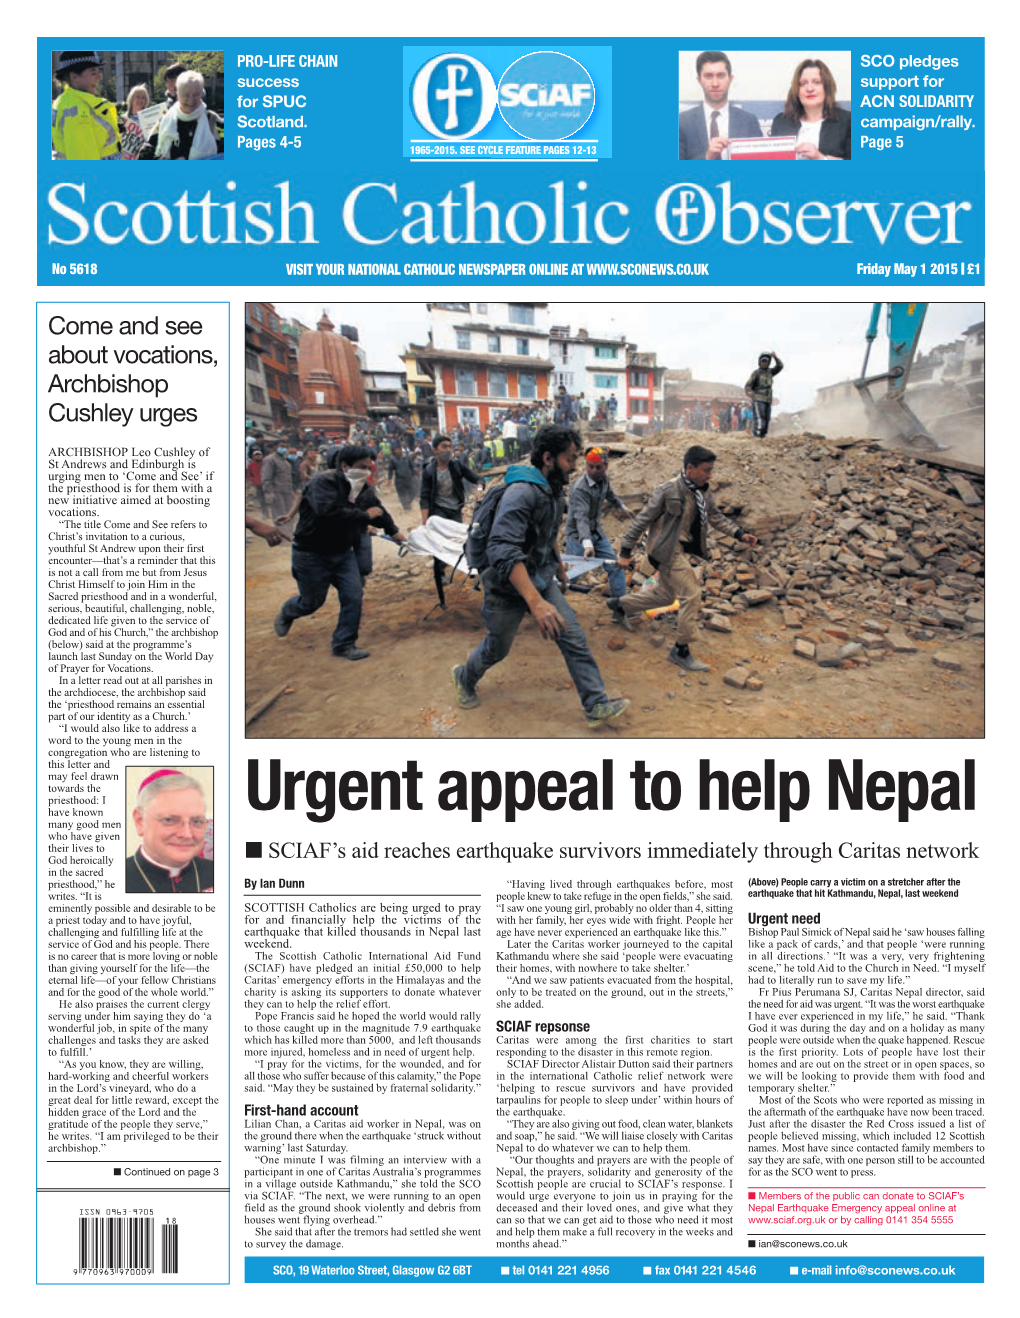 Urgent Appeal to Help Nepal